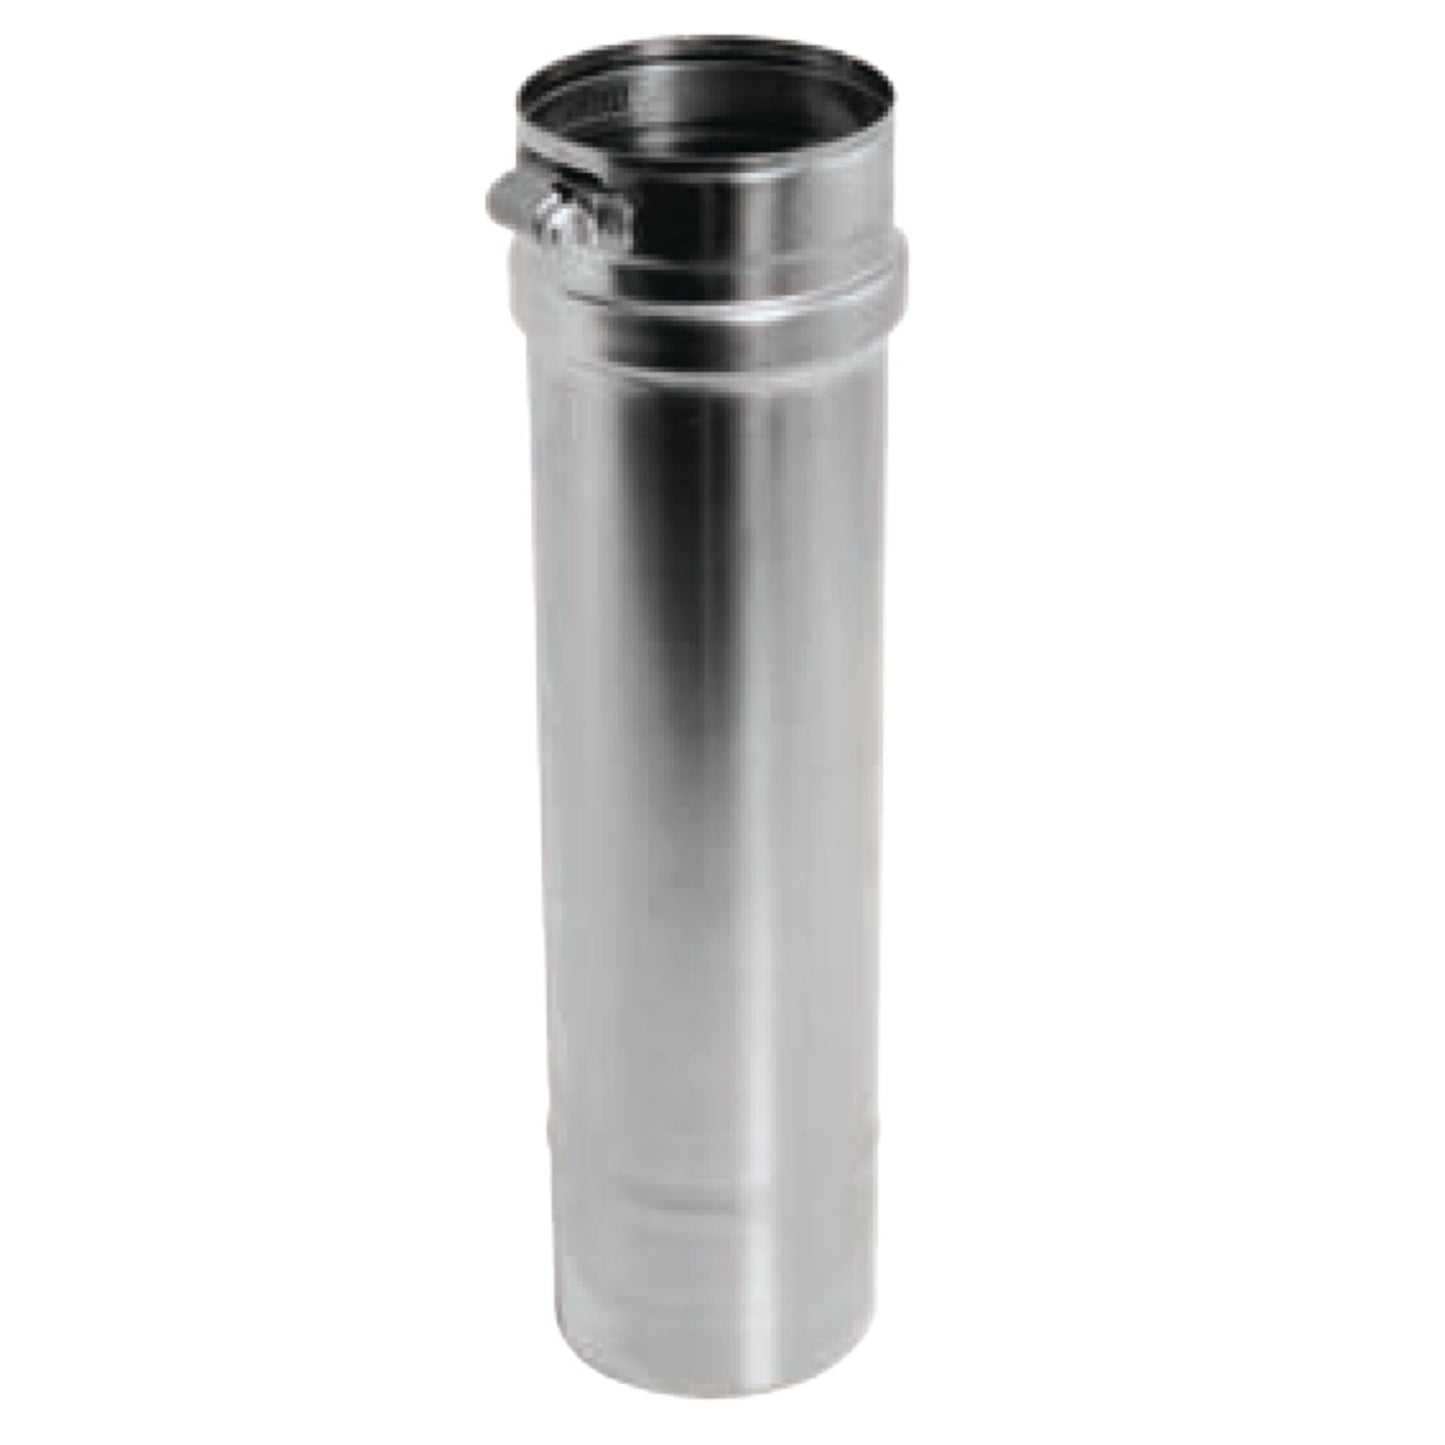 DuraVent FasNSeal 16" x 12" 316L Stainless Steel Vent Length